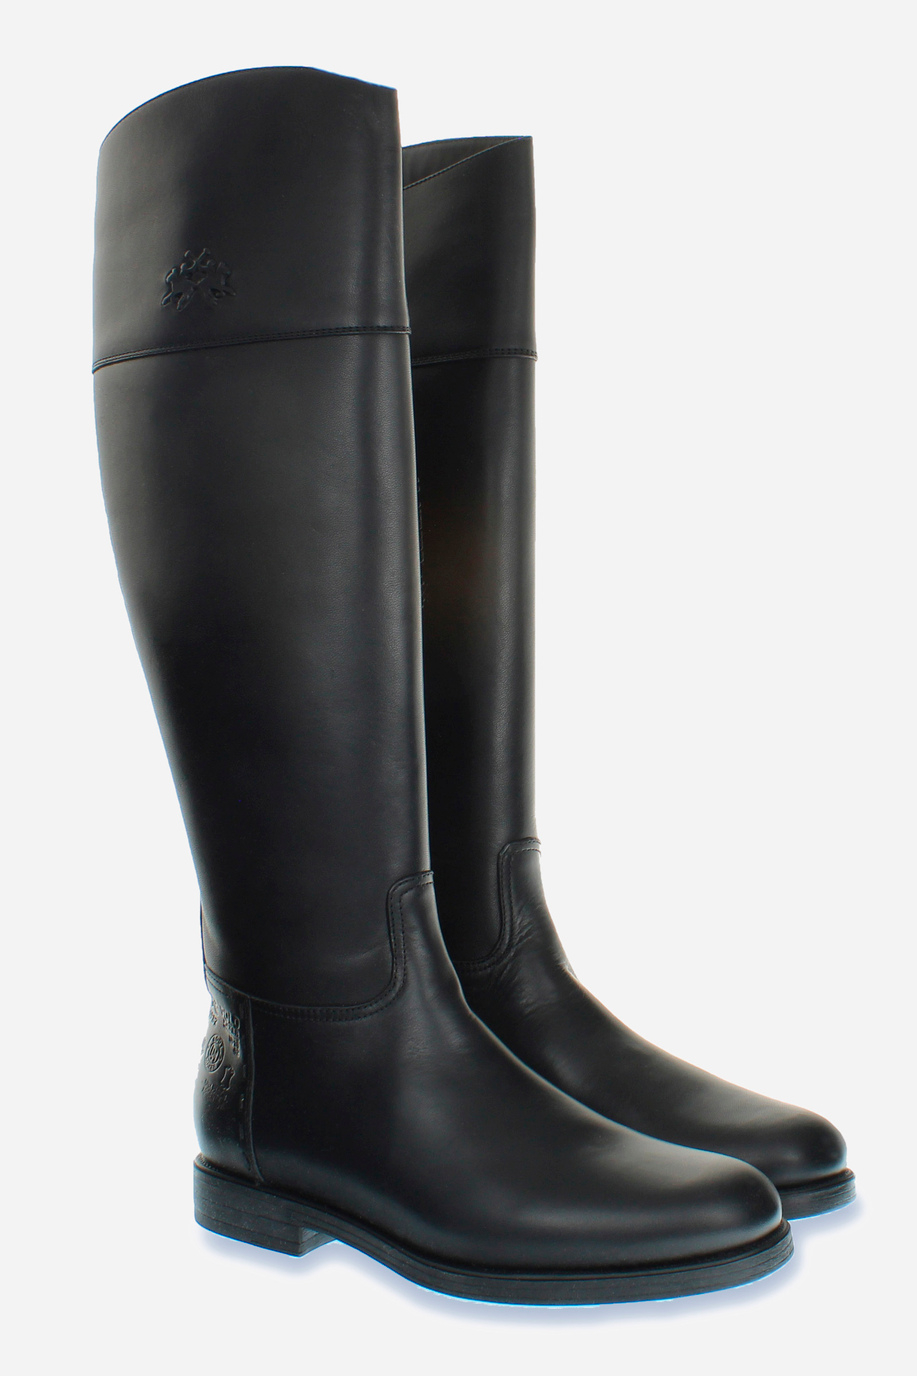 Women’s equestrian style leather boot - Accessories for her | La Martina - Official Online Shop